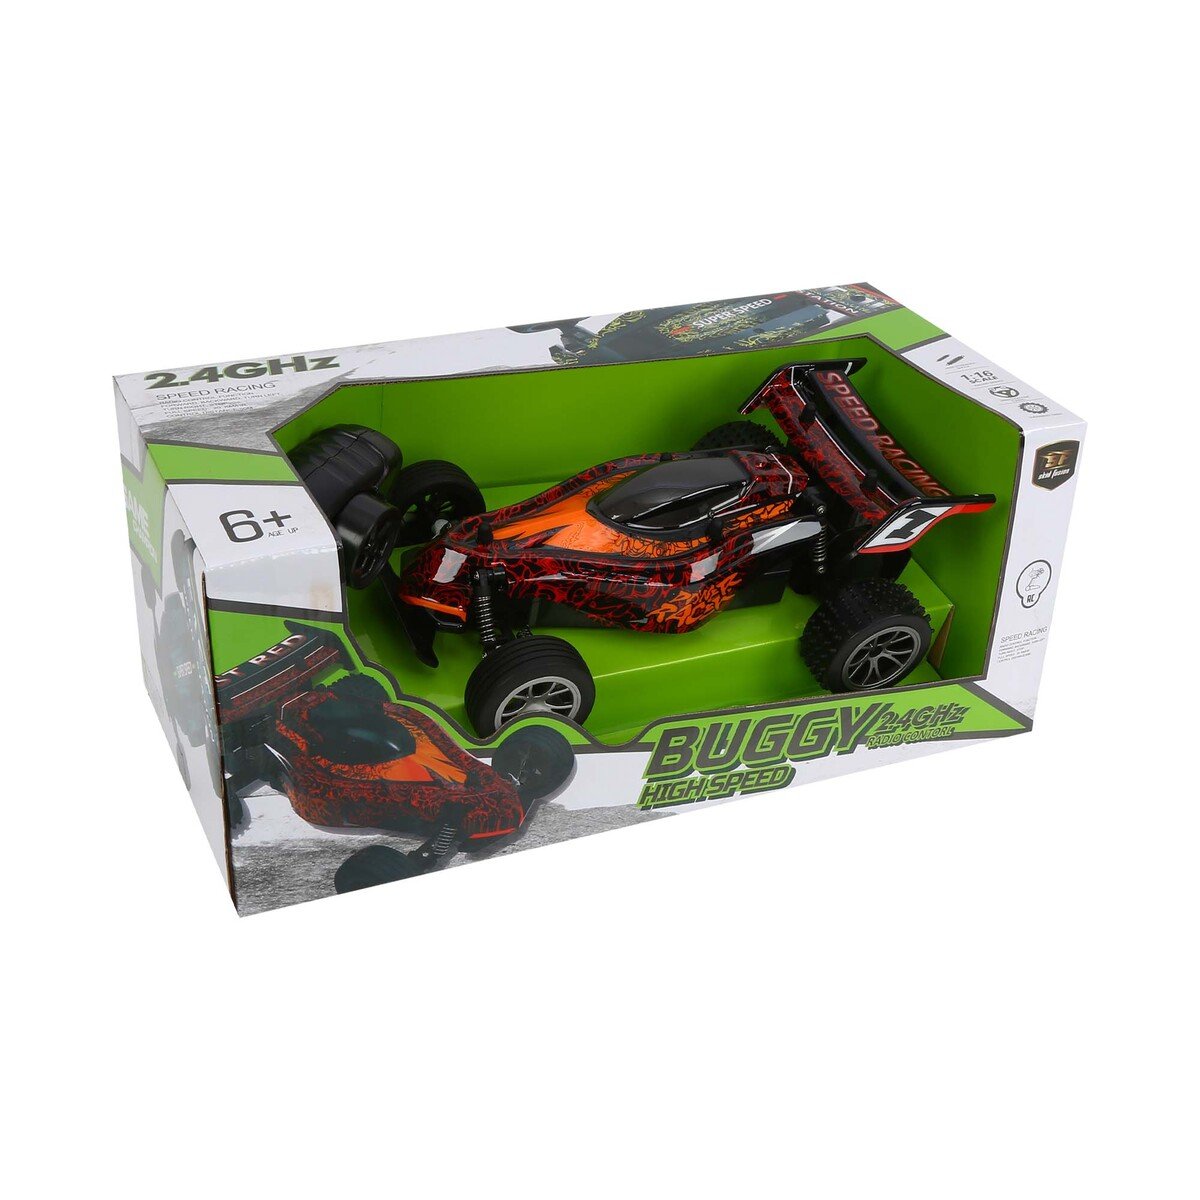 Skid Fusion Rechargeable Remote Control High Speed Buggy Car Scale 1:16 25211